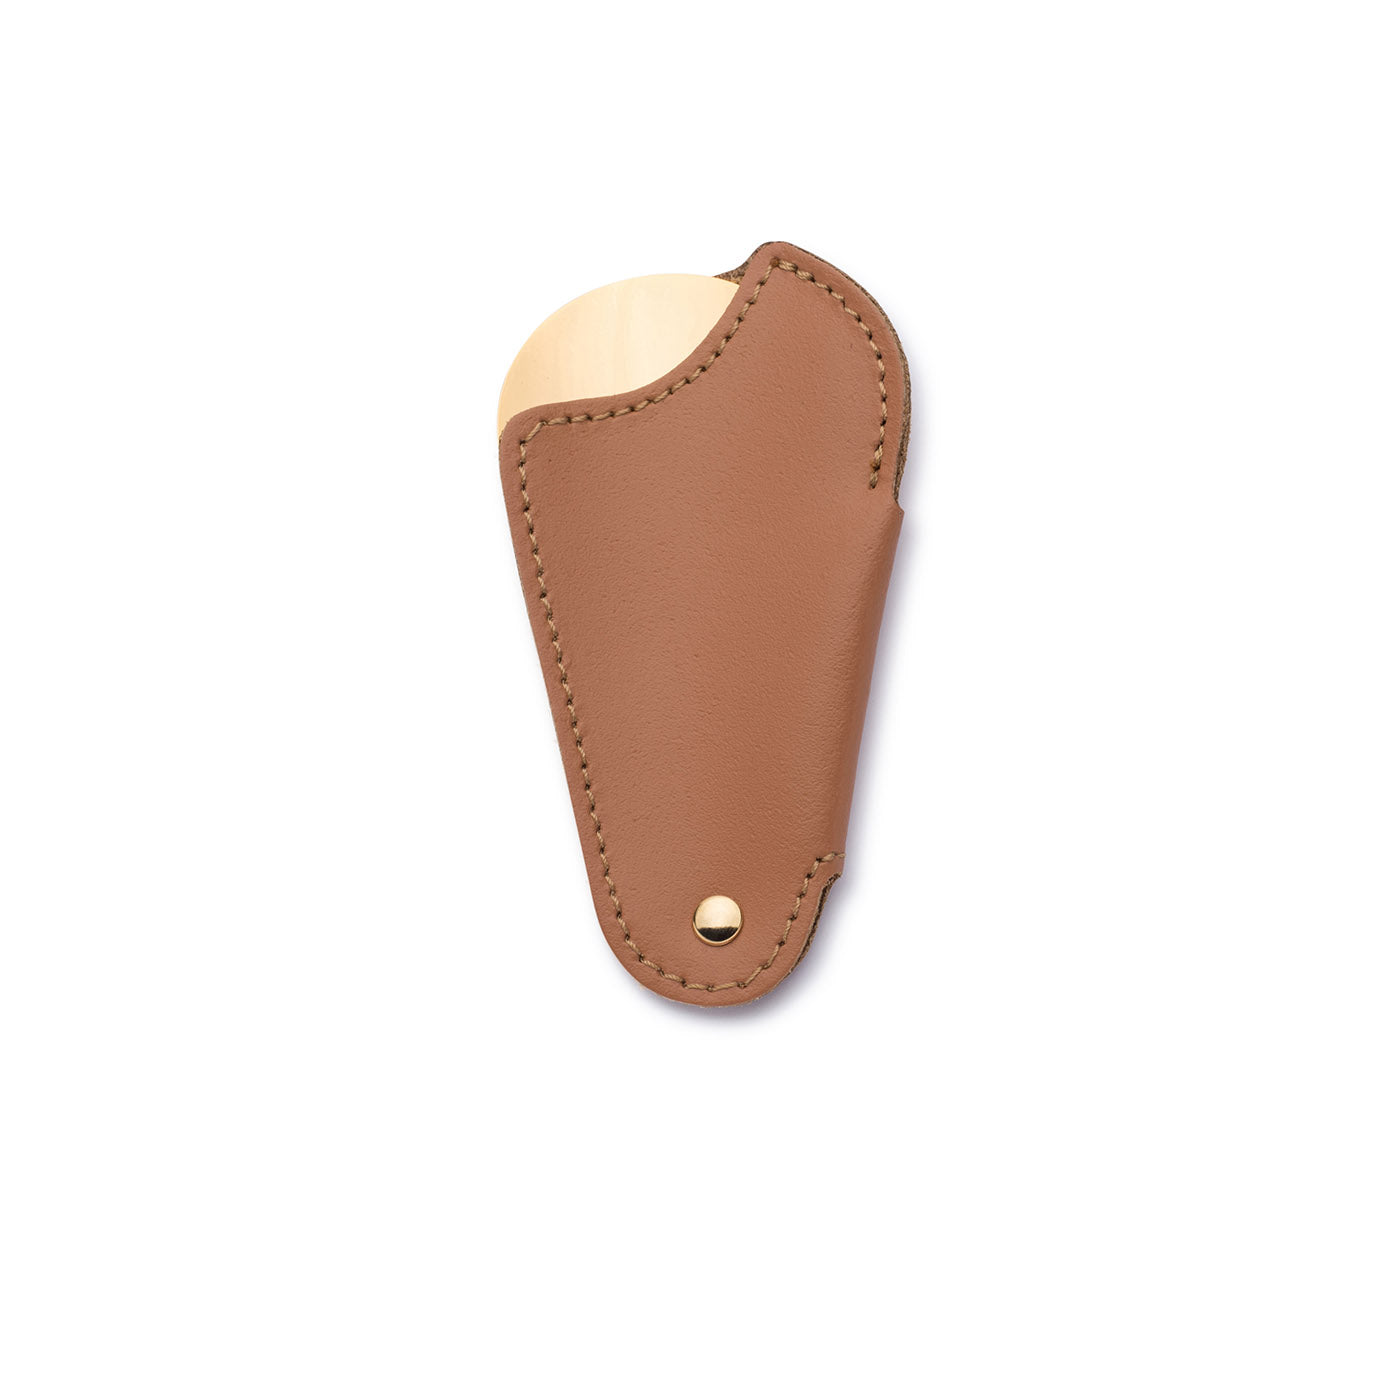 Gold & Brandy-Hued Leather Travel Shoe Horn - Alternative view 2